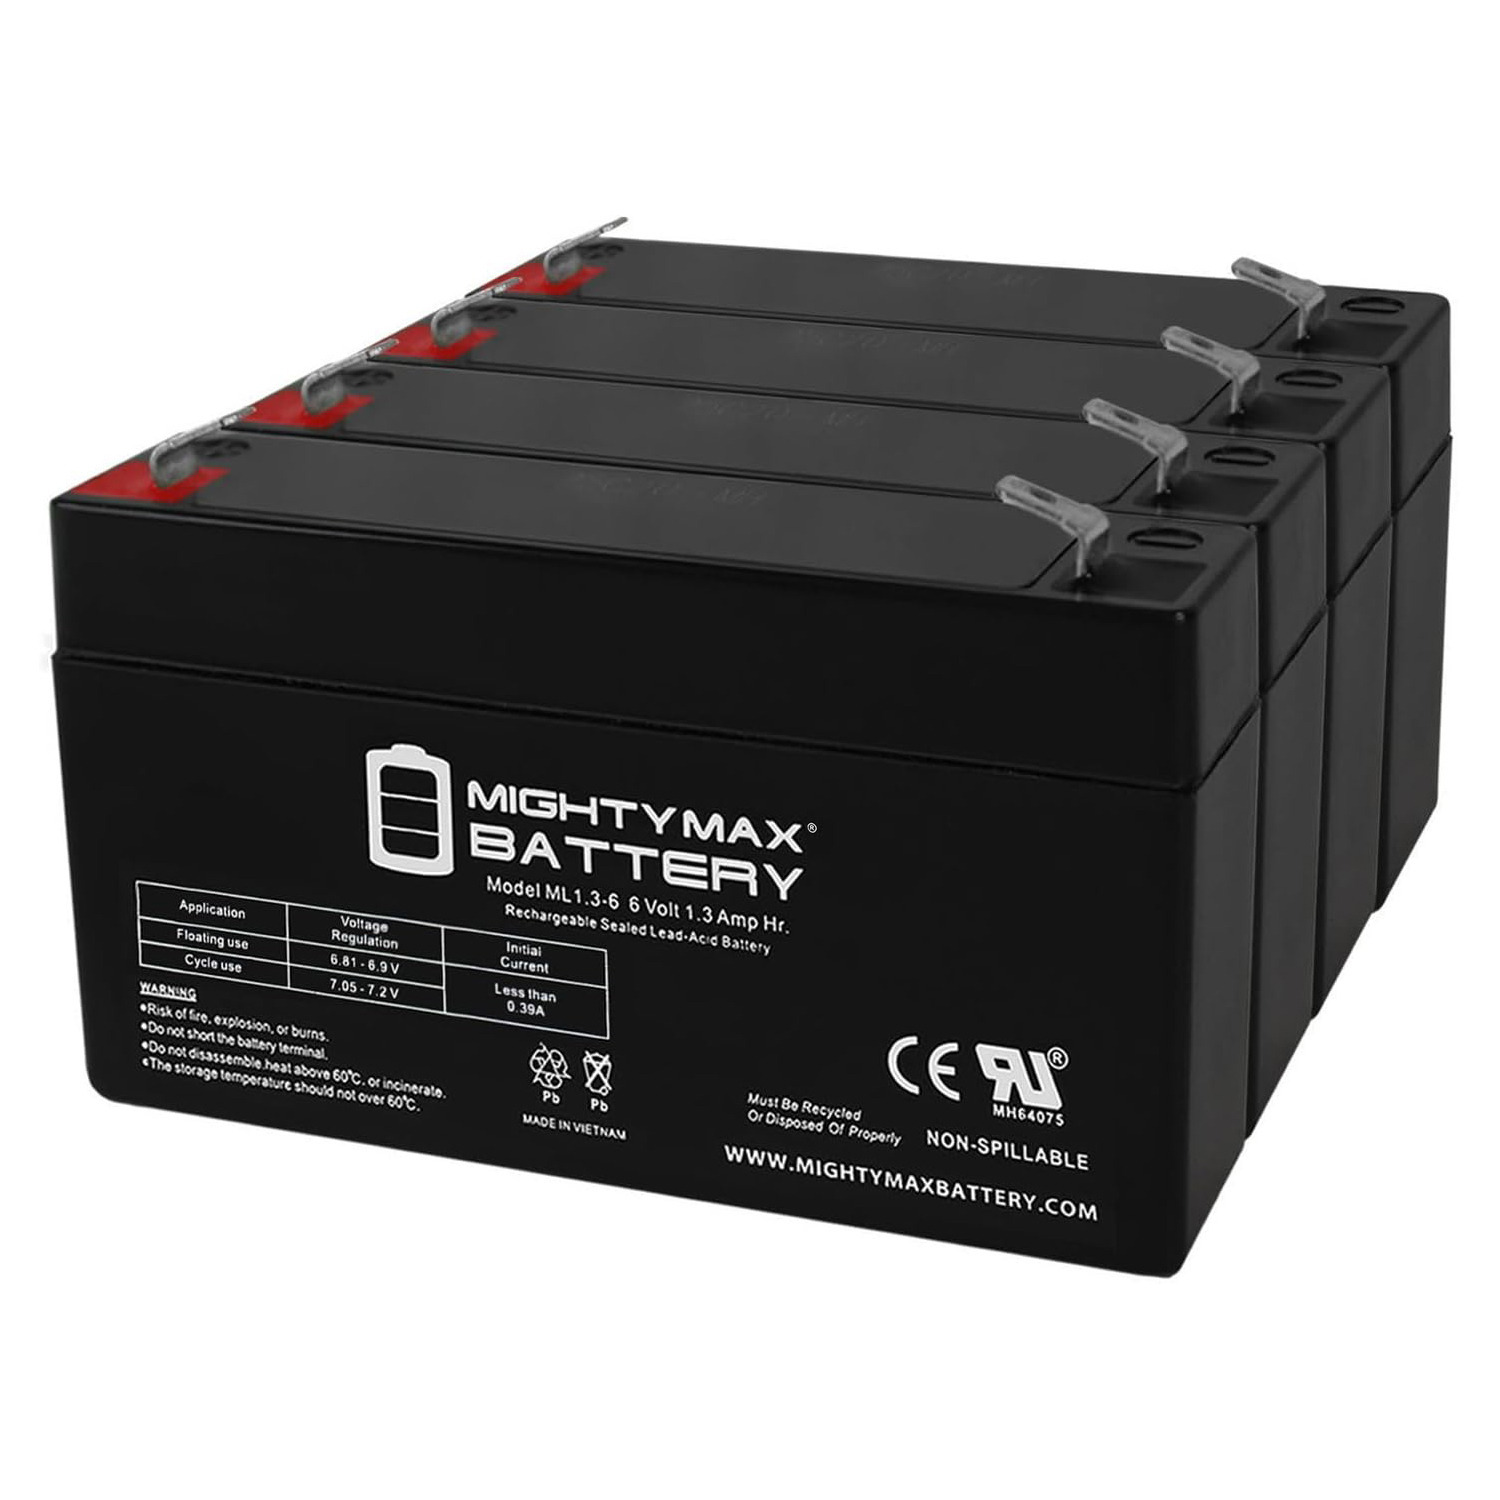 6V 1.3Ah SLA Replacement Battery for Unipower B11001 - 4 Pack